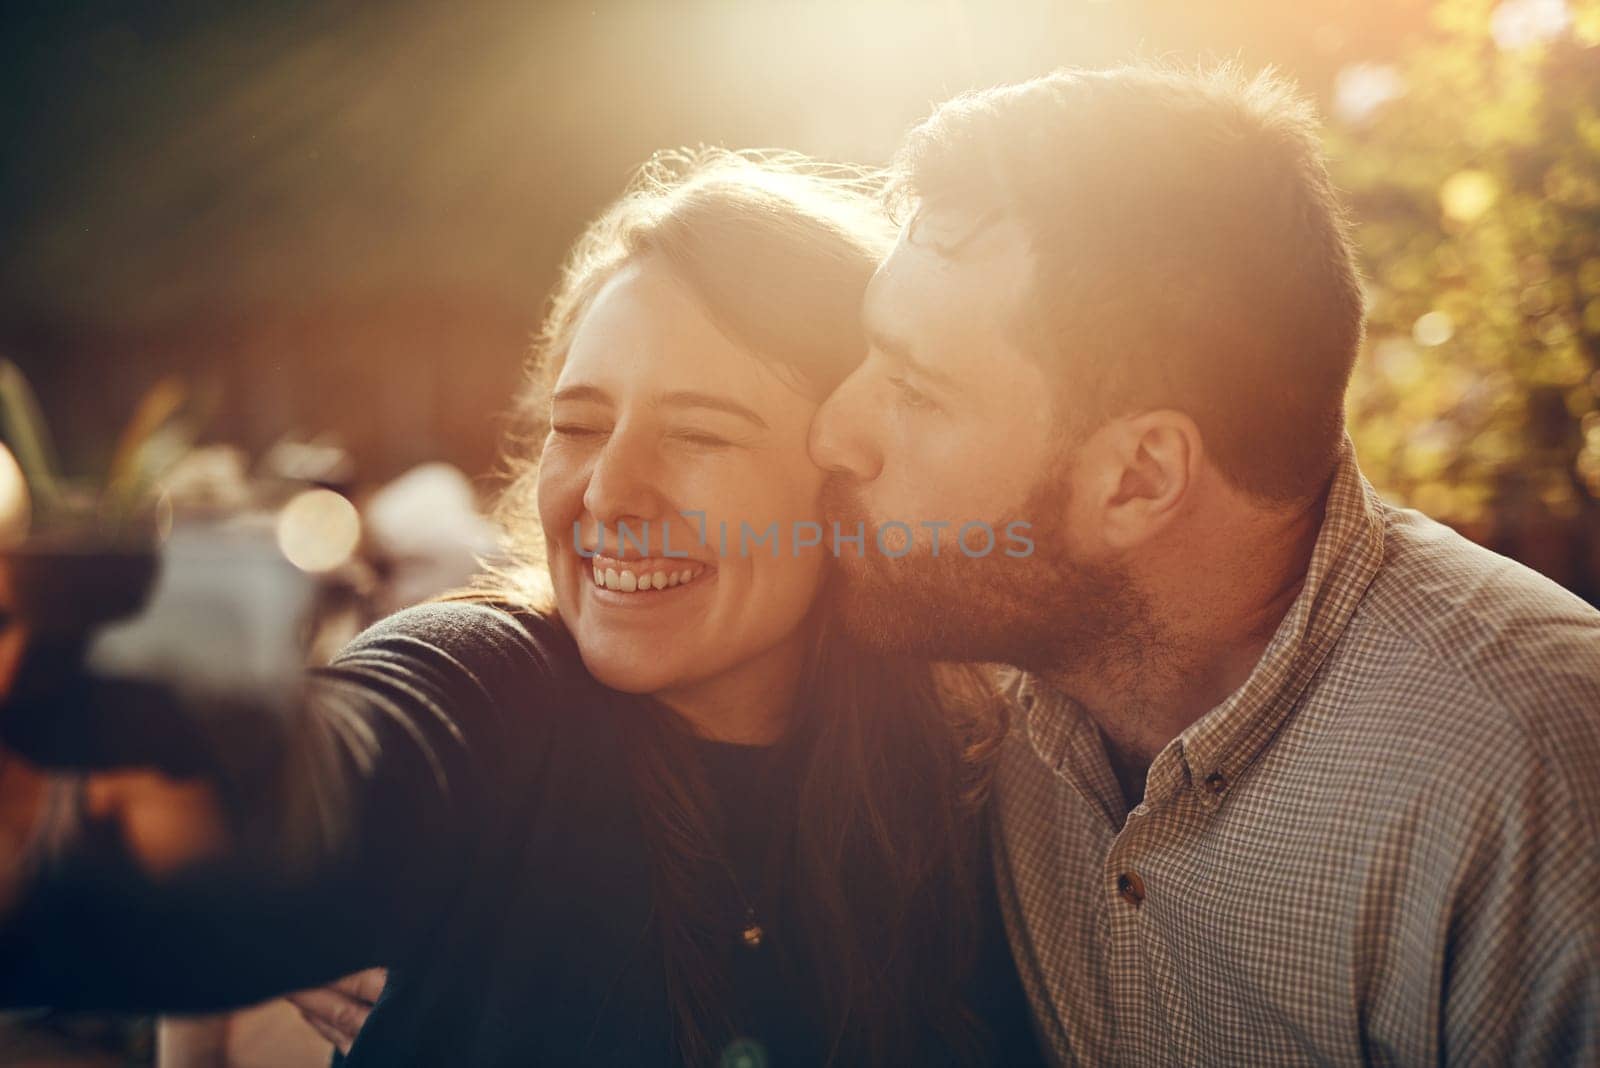 Camera selfie, couple kiss and happiness outdoor in summer smile about bonding and care. Travel of a happy boyfriend and girlfriend in nature on a walking or hiking travel feeling freedom and love.